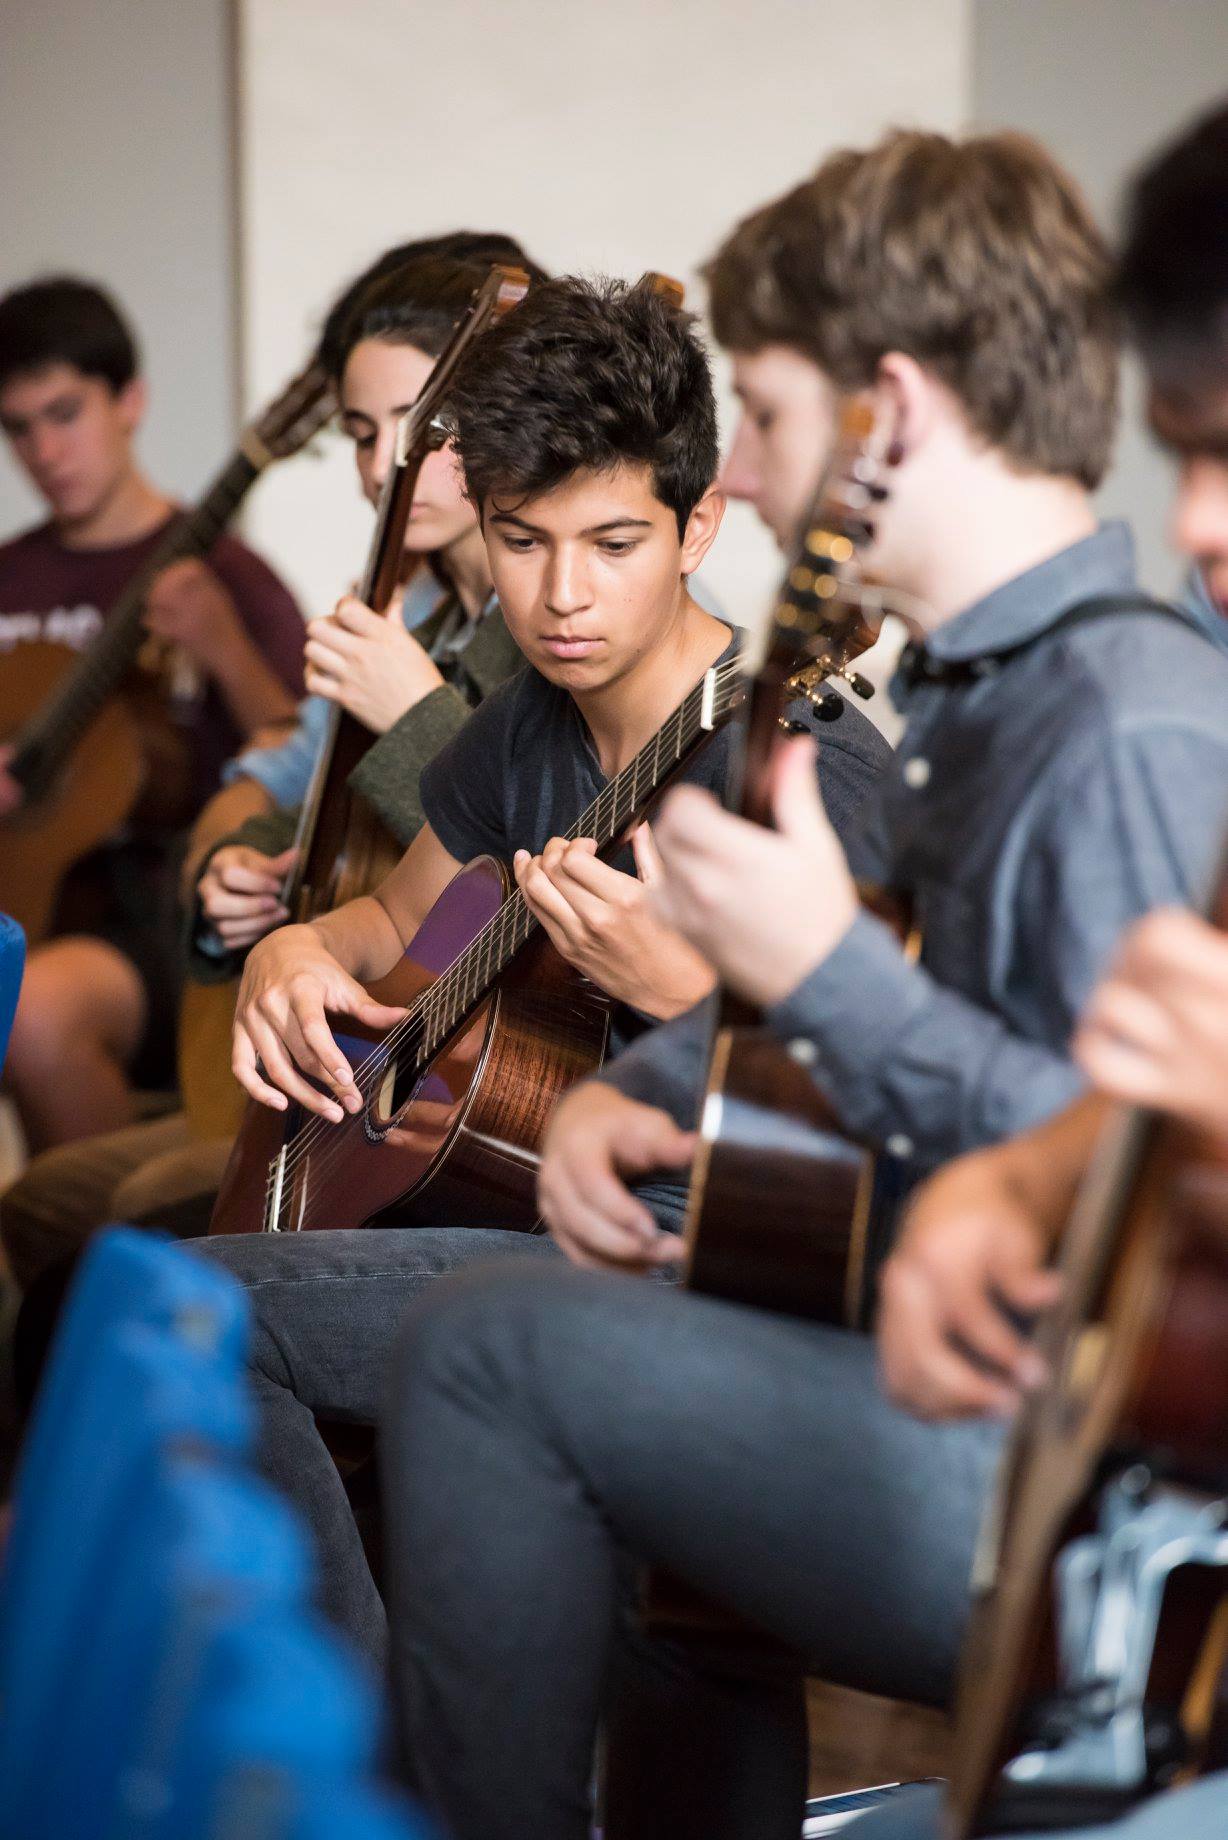 GuitarFest students playing